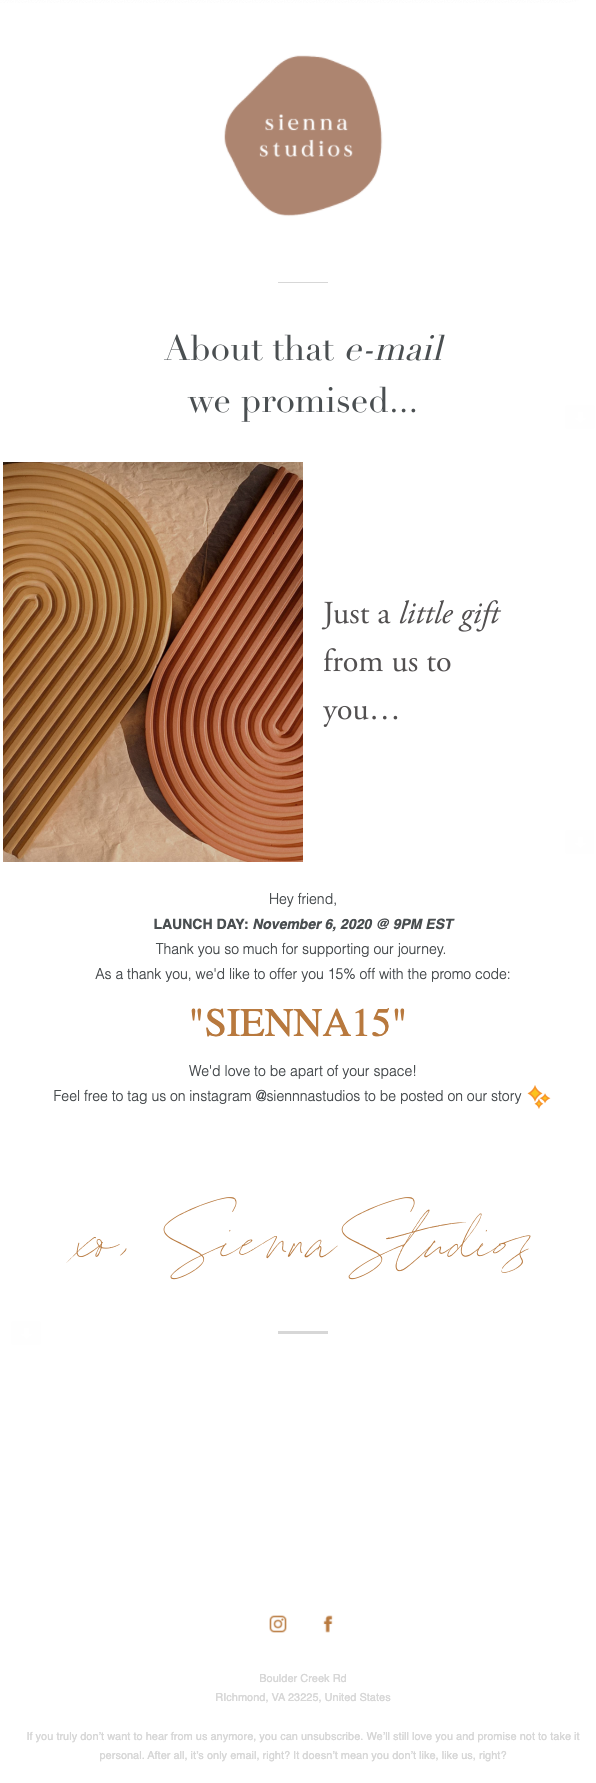 A welcome email example from Sienna with a discount offer to welcome new subscribers